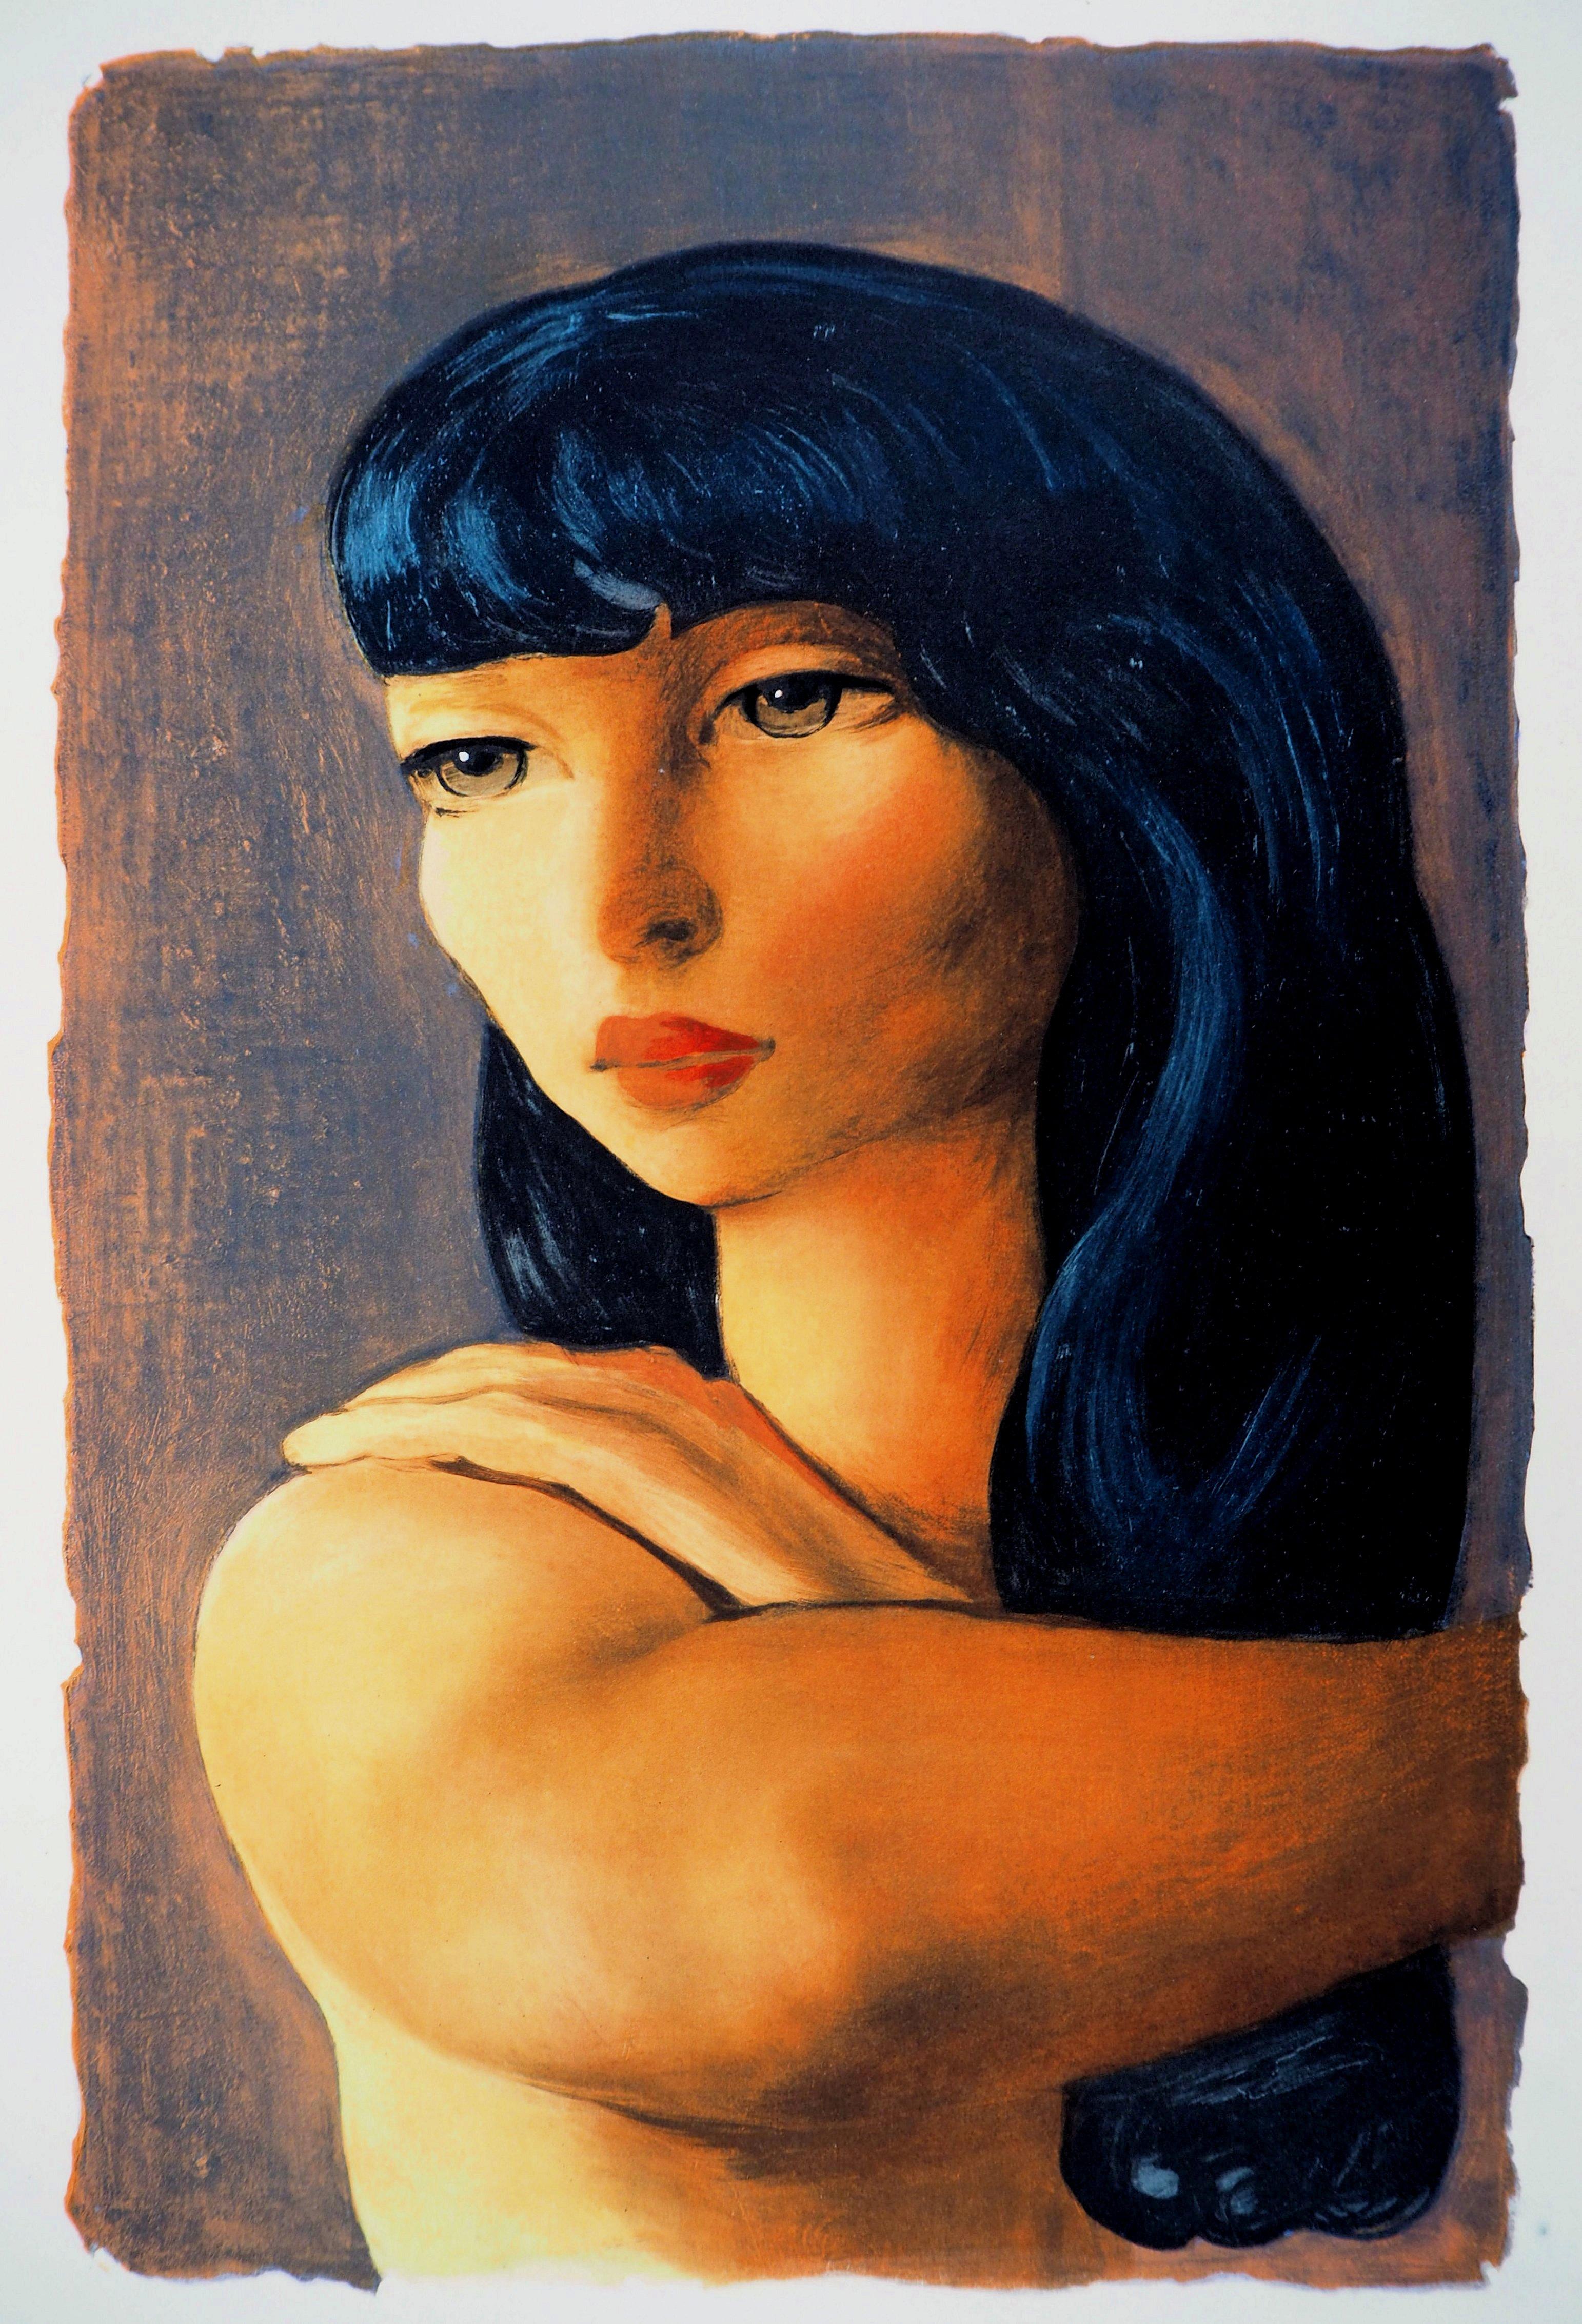 Dark Hair Woman with Tall Eyes - Lithograph - Print by Moise Kisling